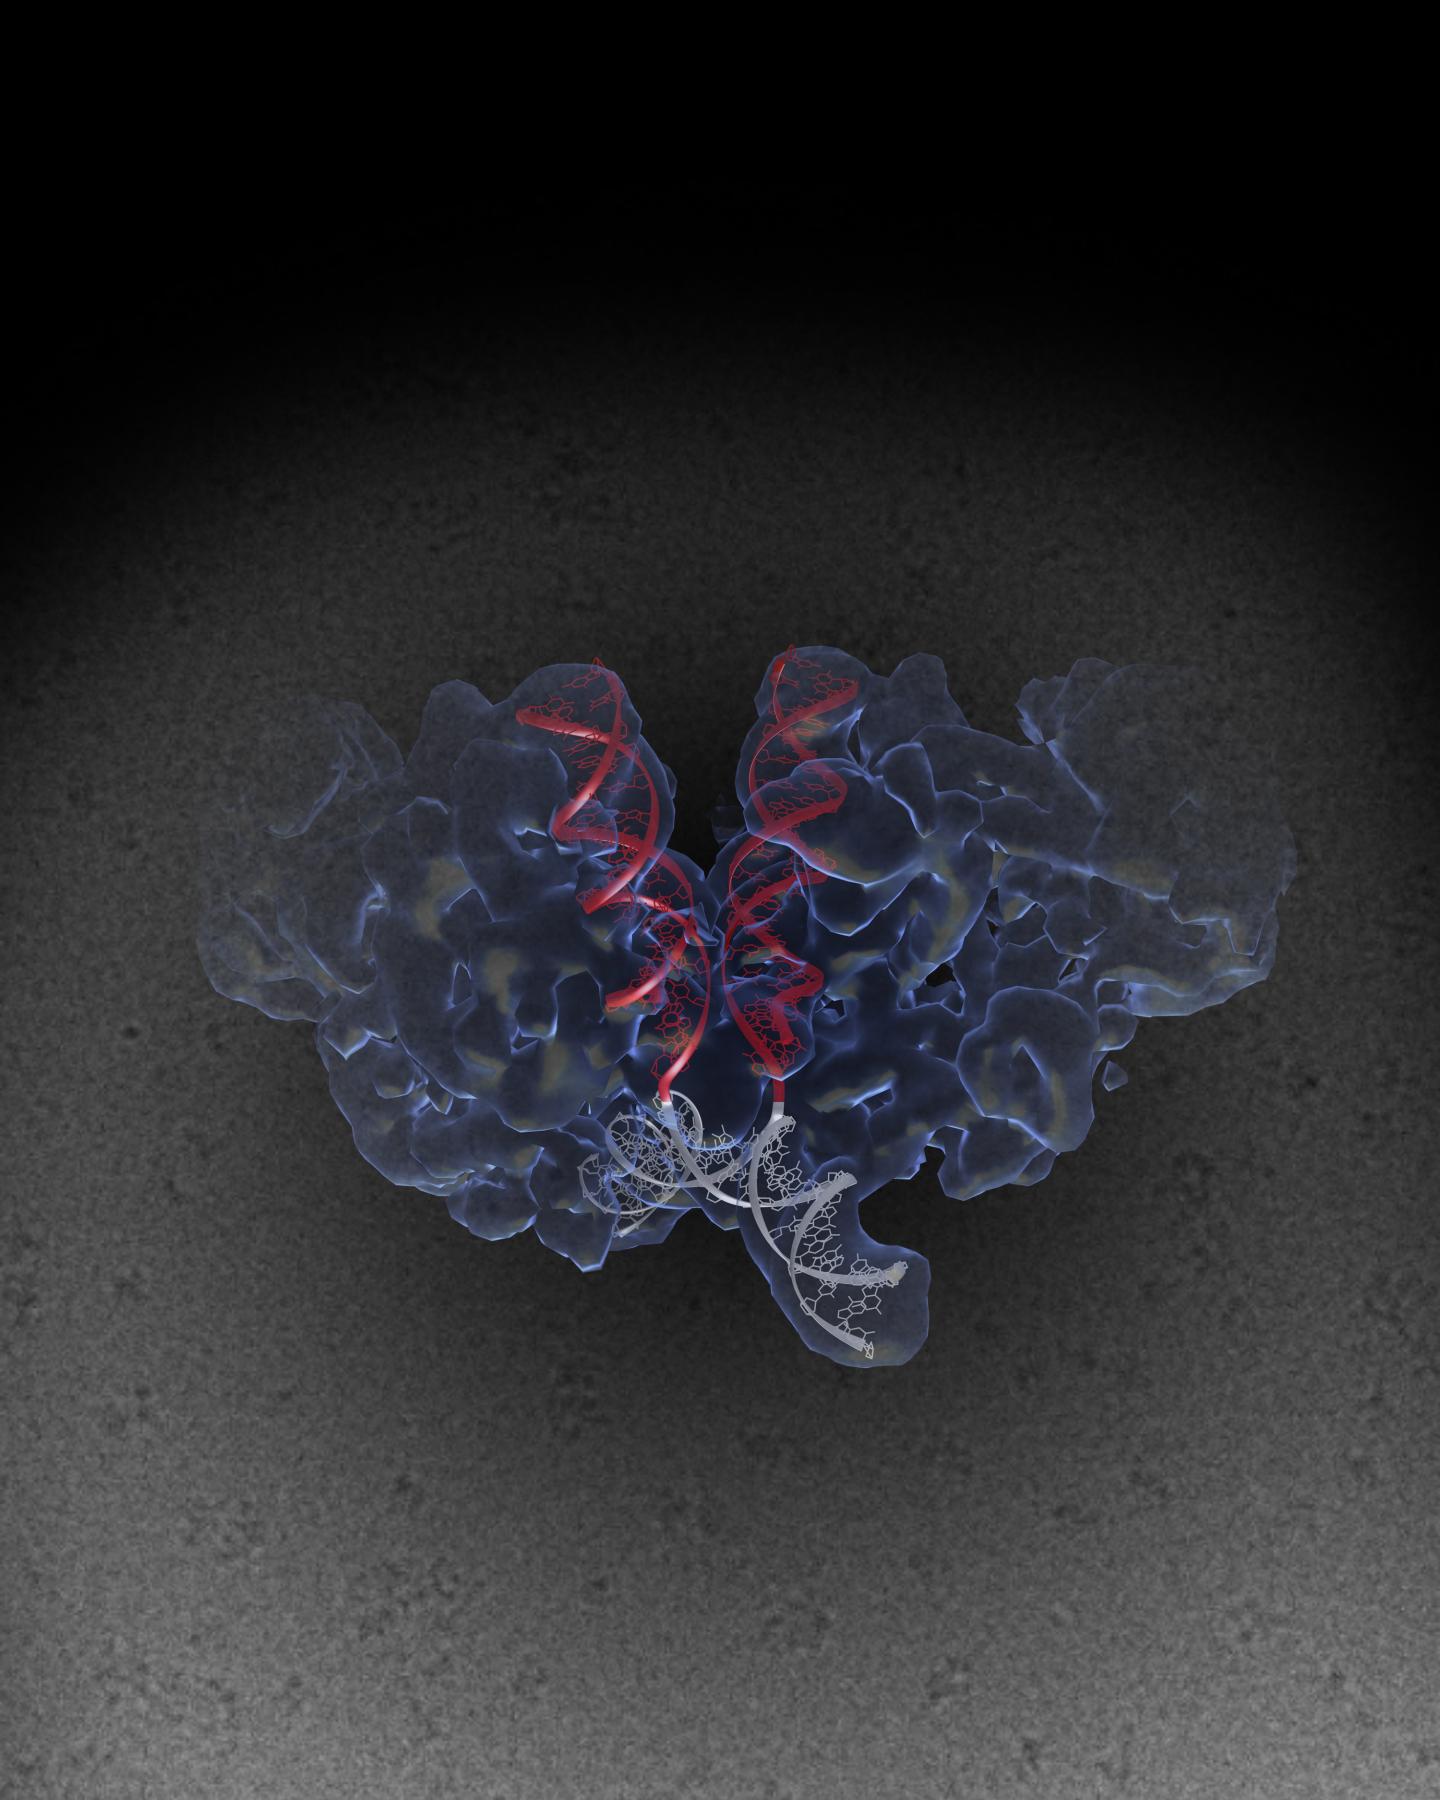 Salk Scientists Crack the Structure of HIV Machinery (1 of 2)